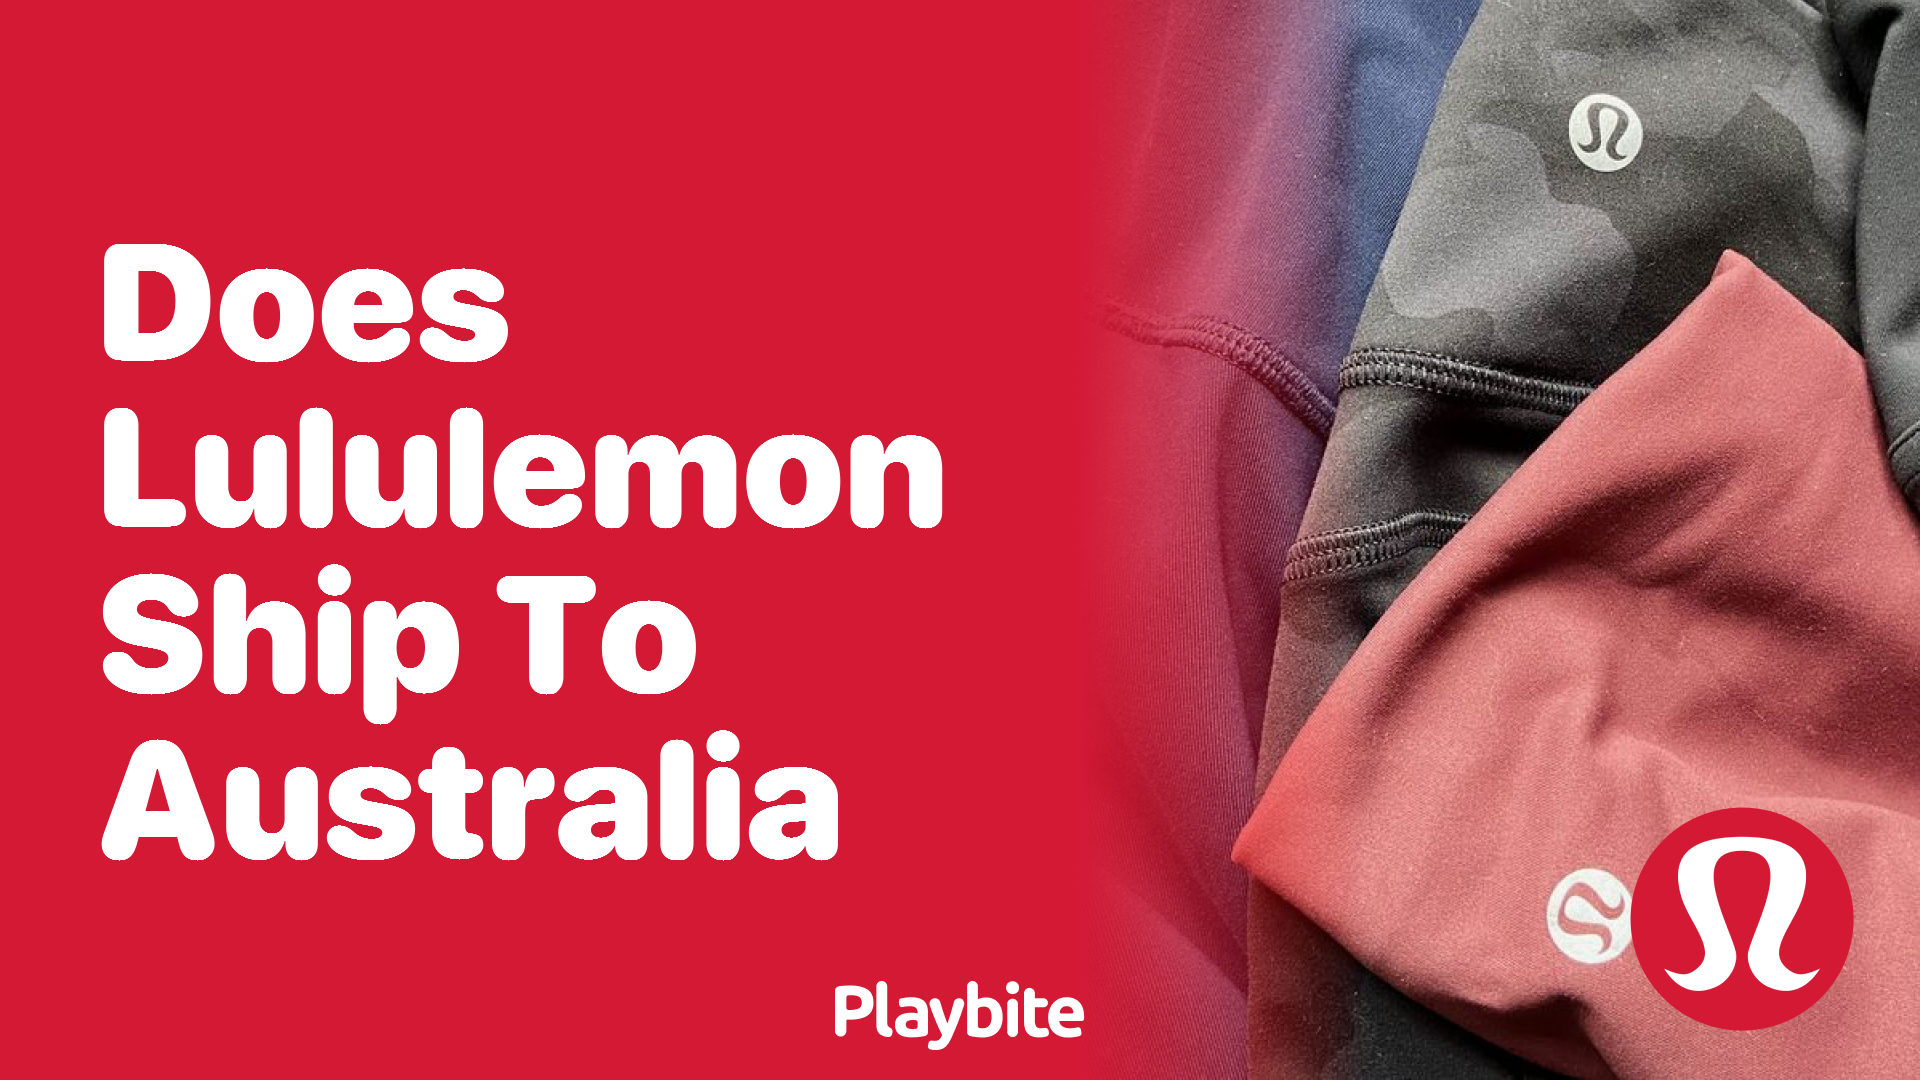 Does Lululemon Ship to Australia? Find Out Here! - Playbite